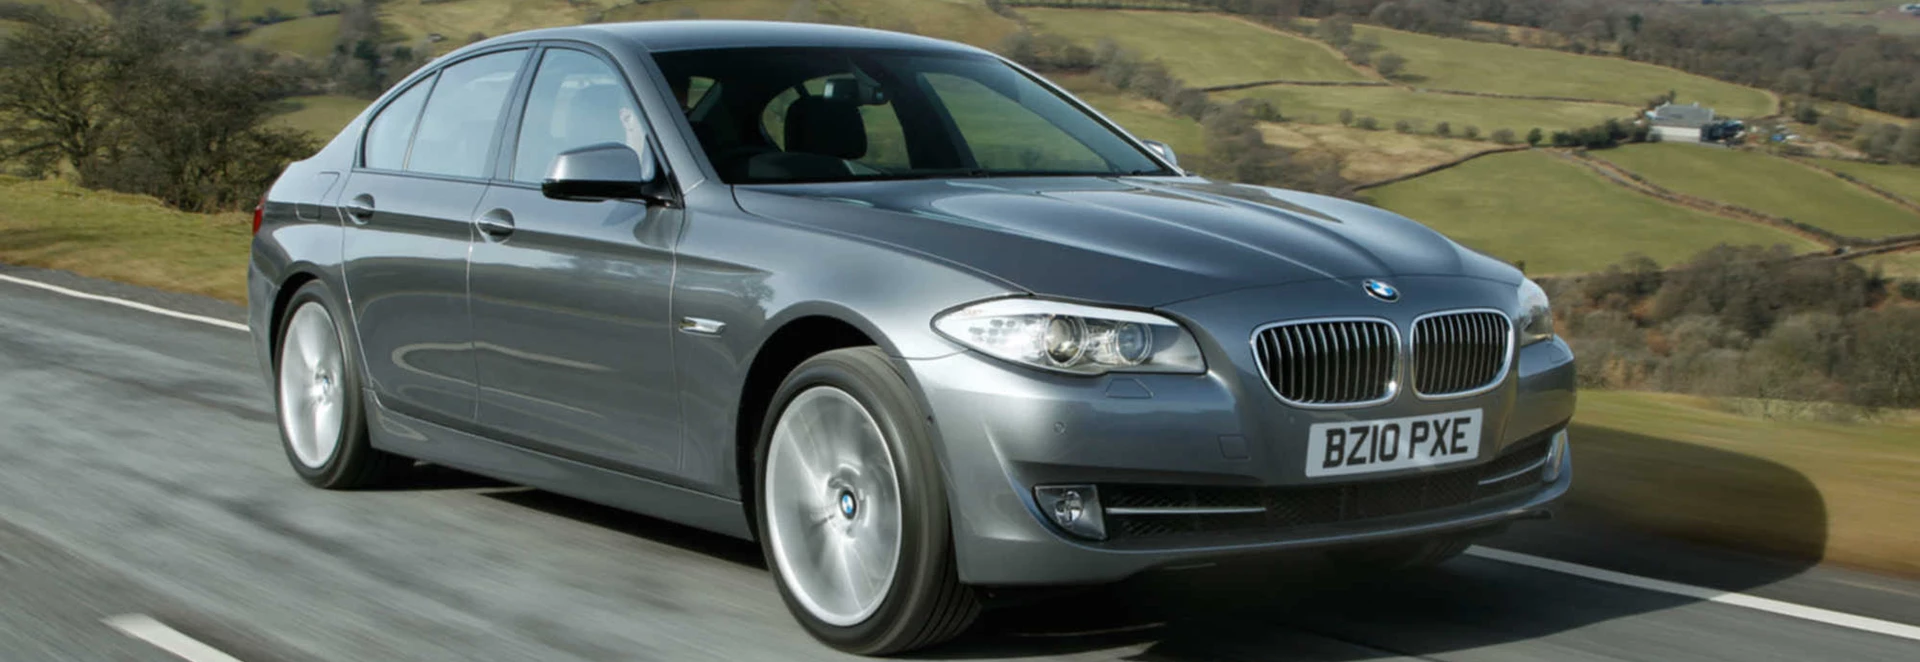 BMW 5 Series saloon review 